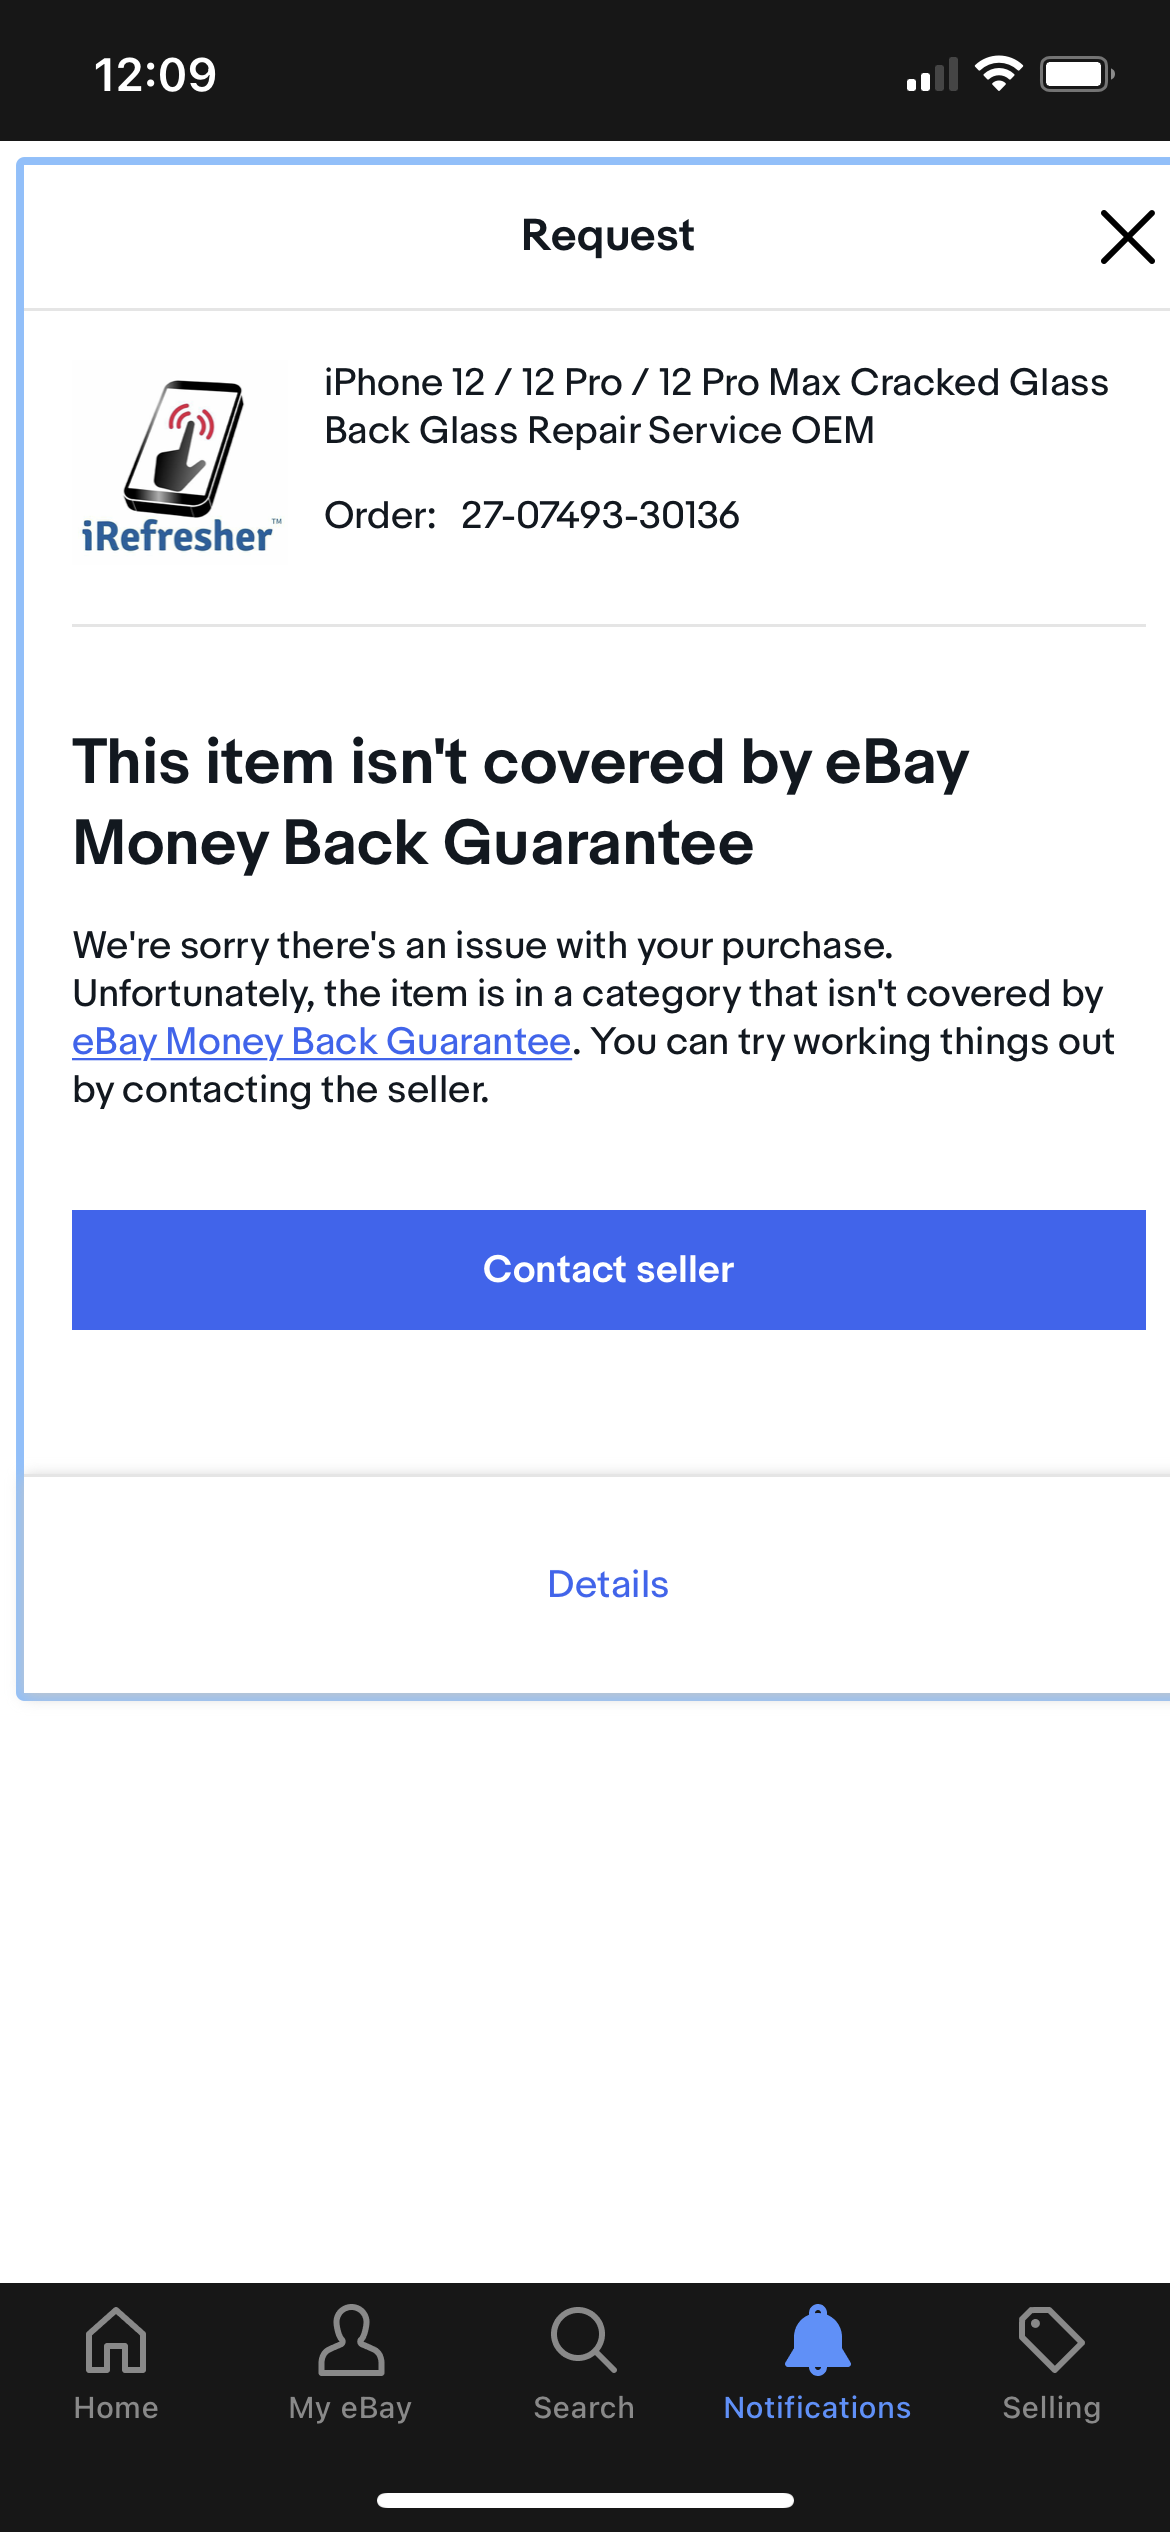 eBay telling me they can’t help